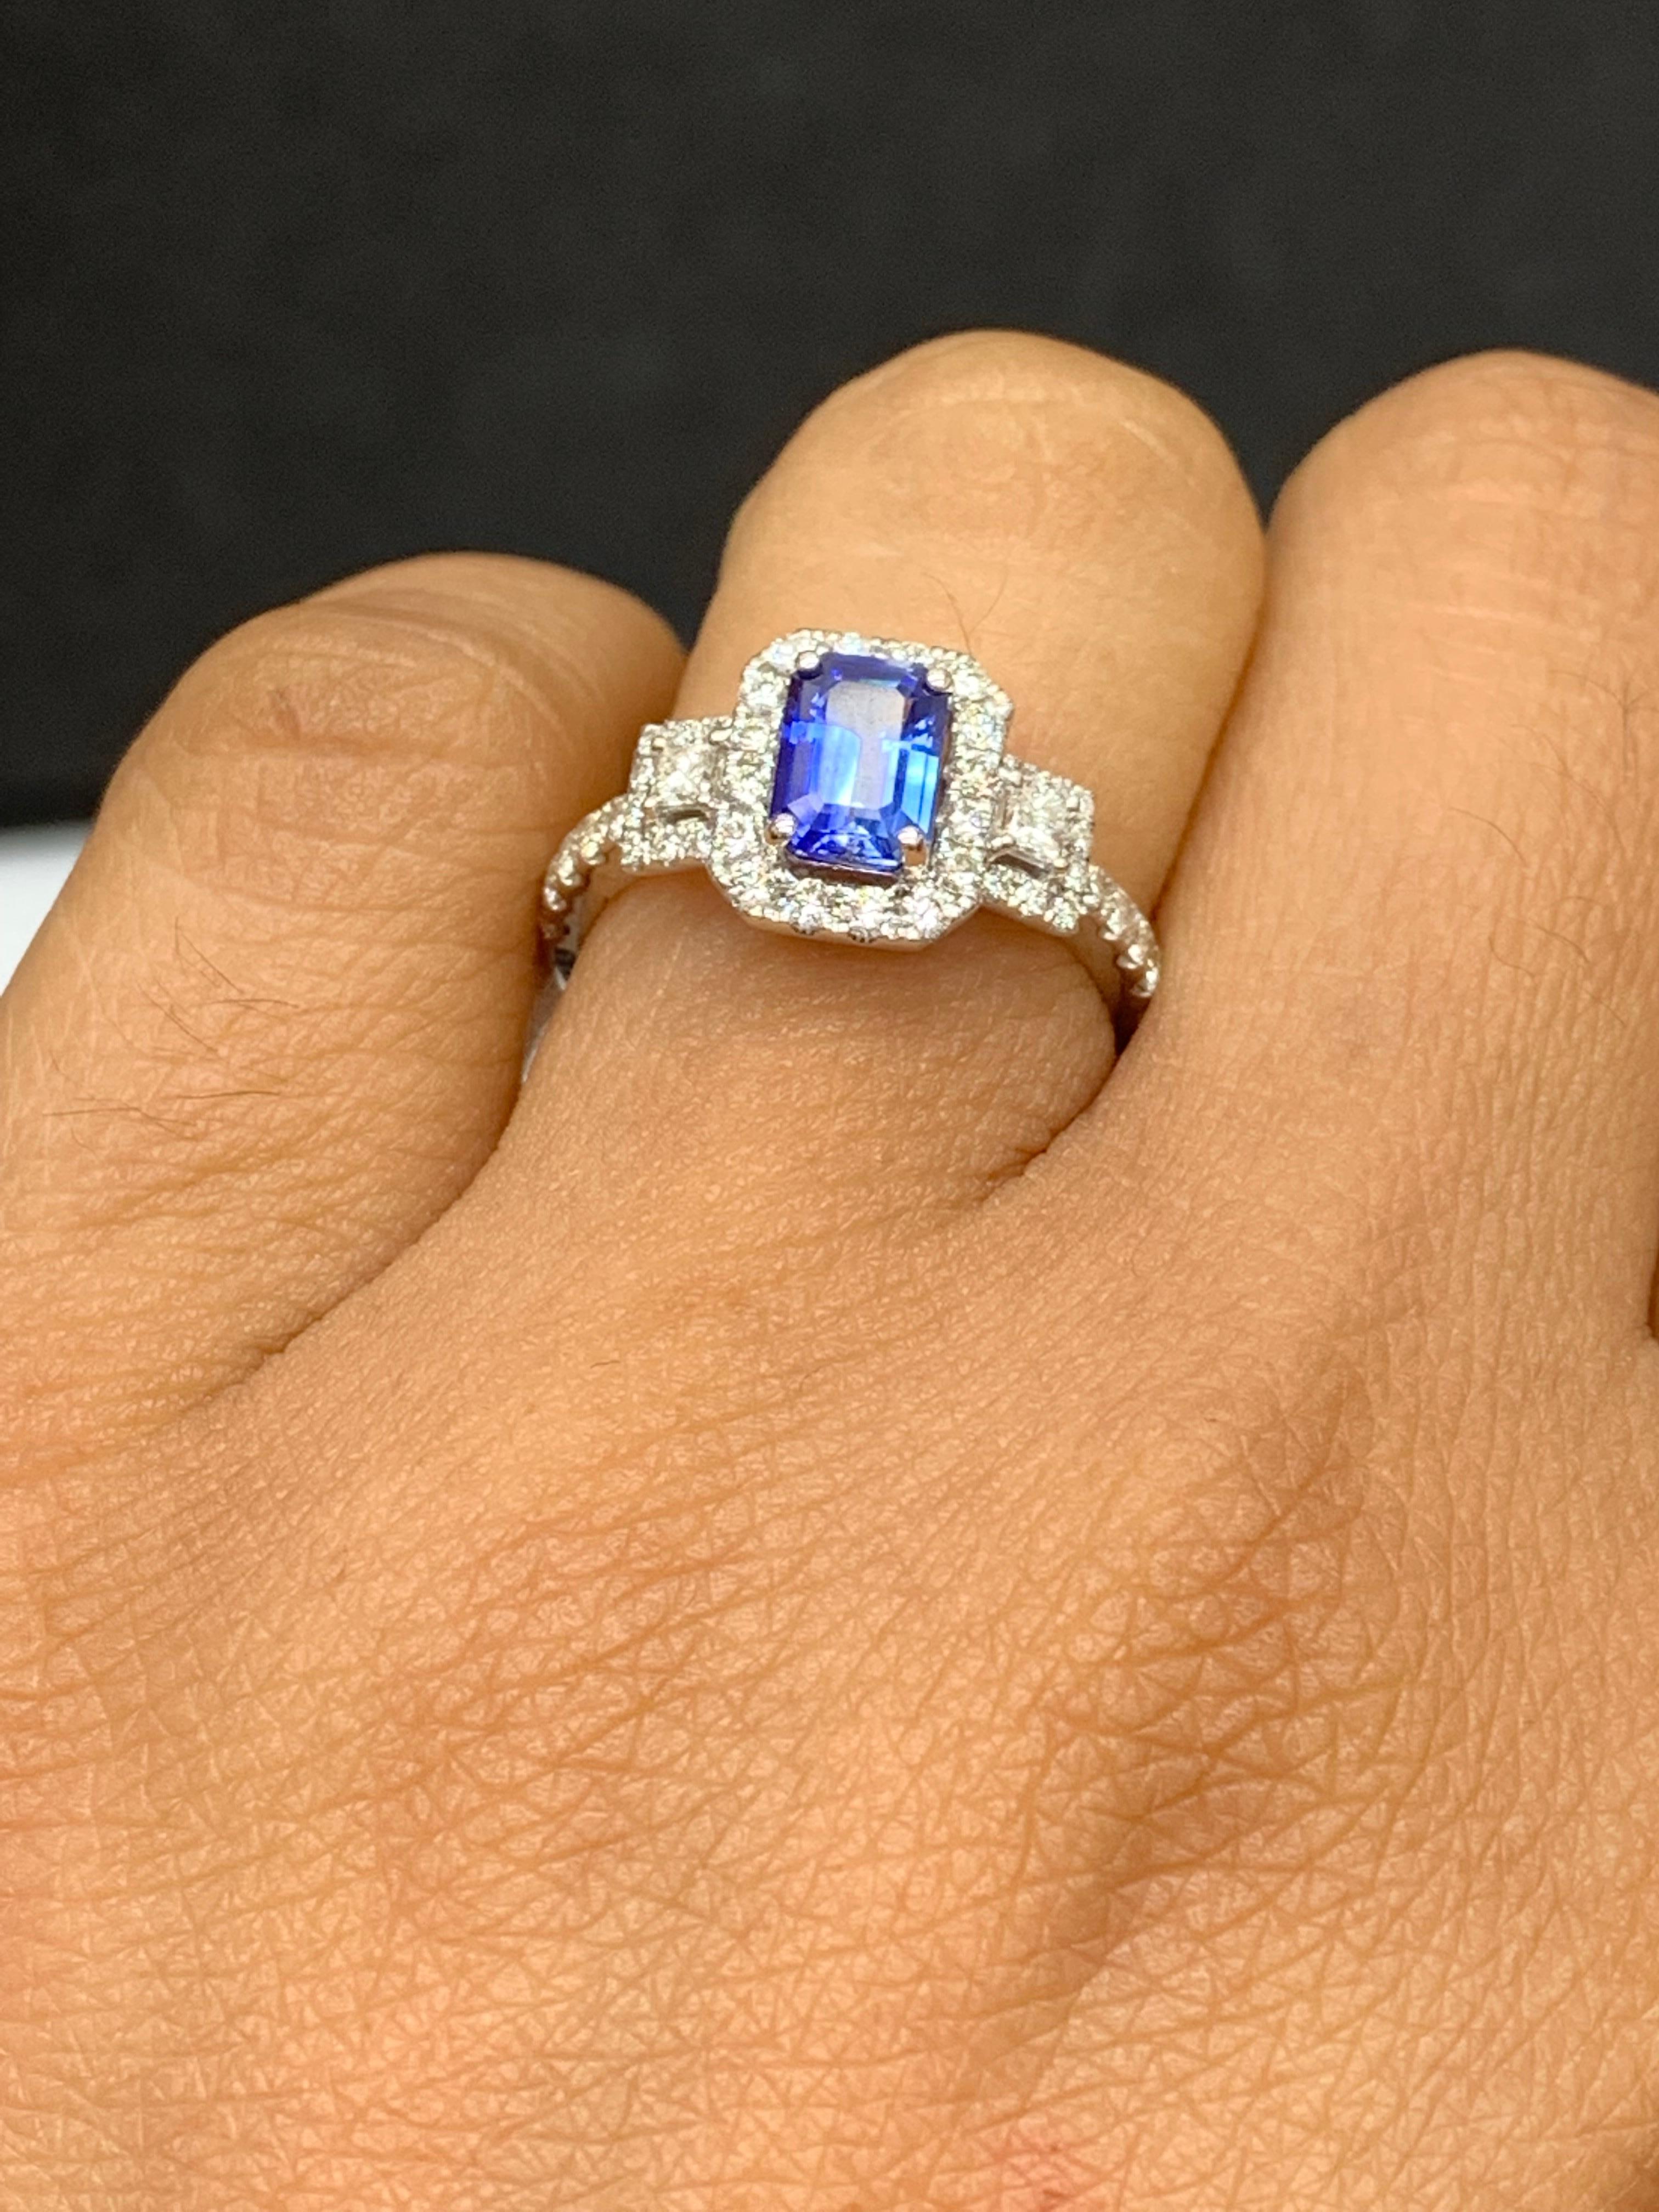 A stunning ring showcasing a rich emerald cut Blue Sapphire weighing 1.21 carats surrounded by diamonds. The center stone is surrounded by a row of 42 diamonds, weighing 0.57 carats total, with 2 princesses cut diamonds on each side weighing 0.12